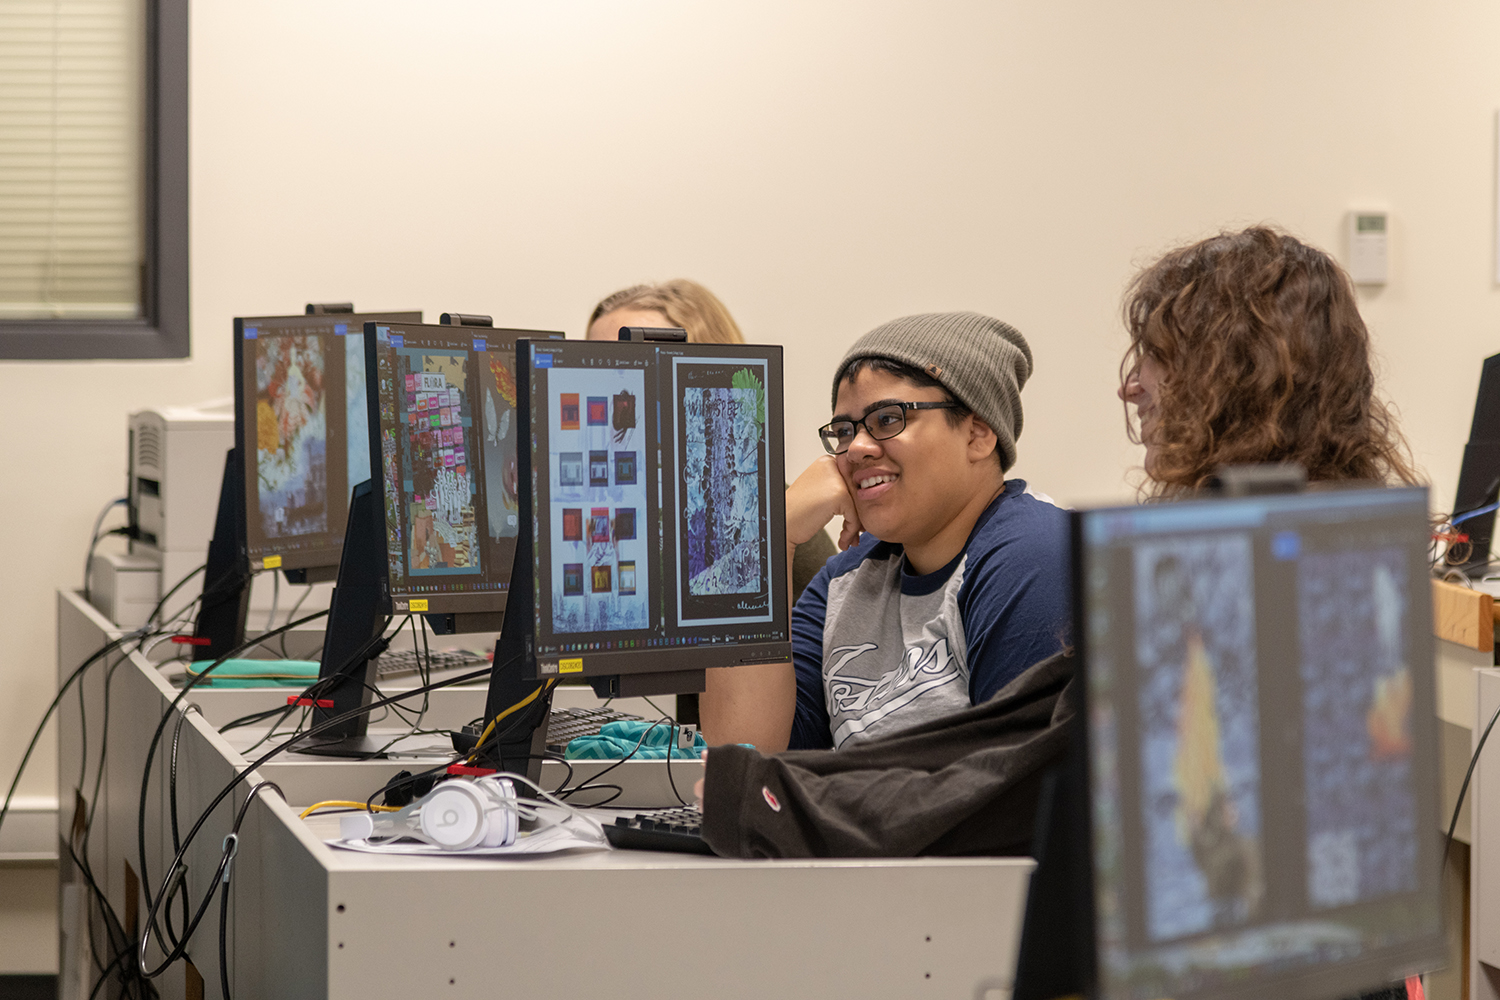 Foundations students critiquing artwork in computer lab. (Fall 2018)